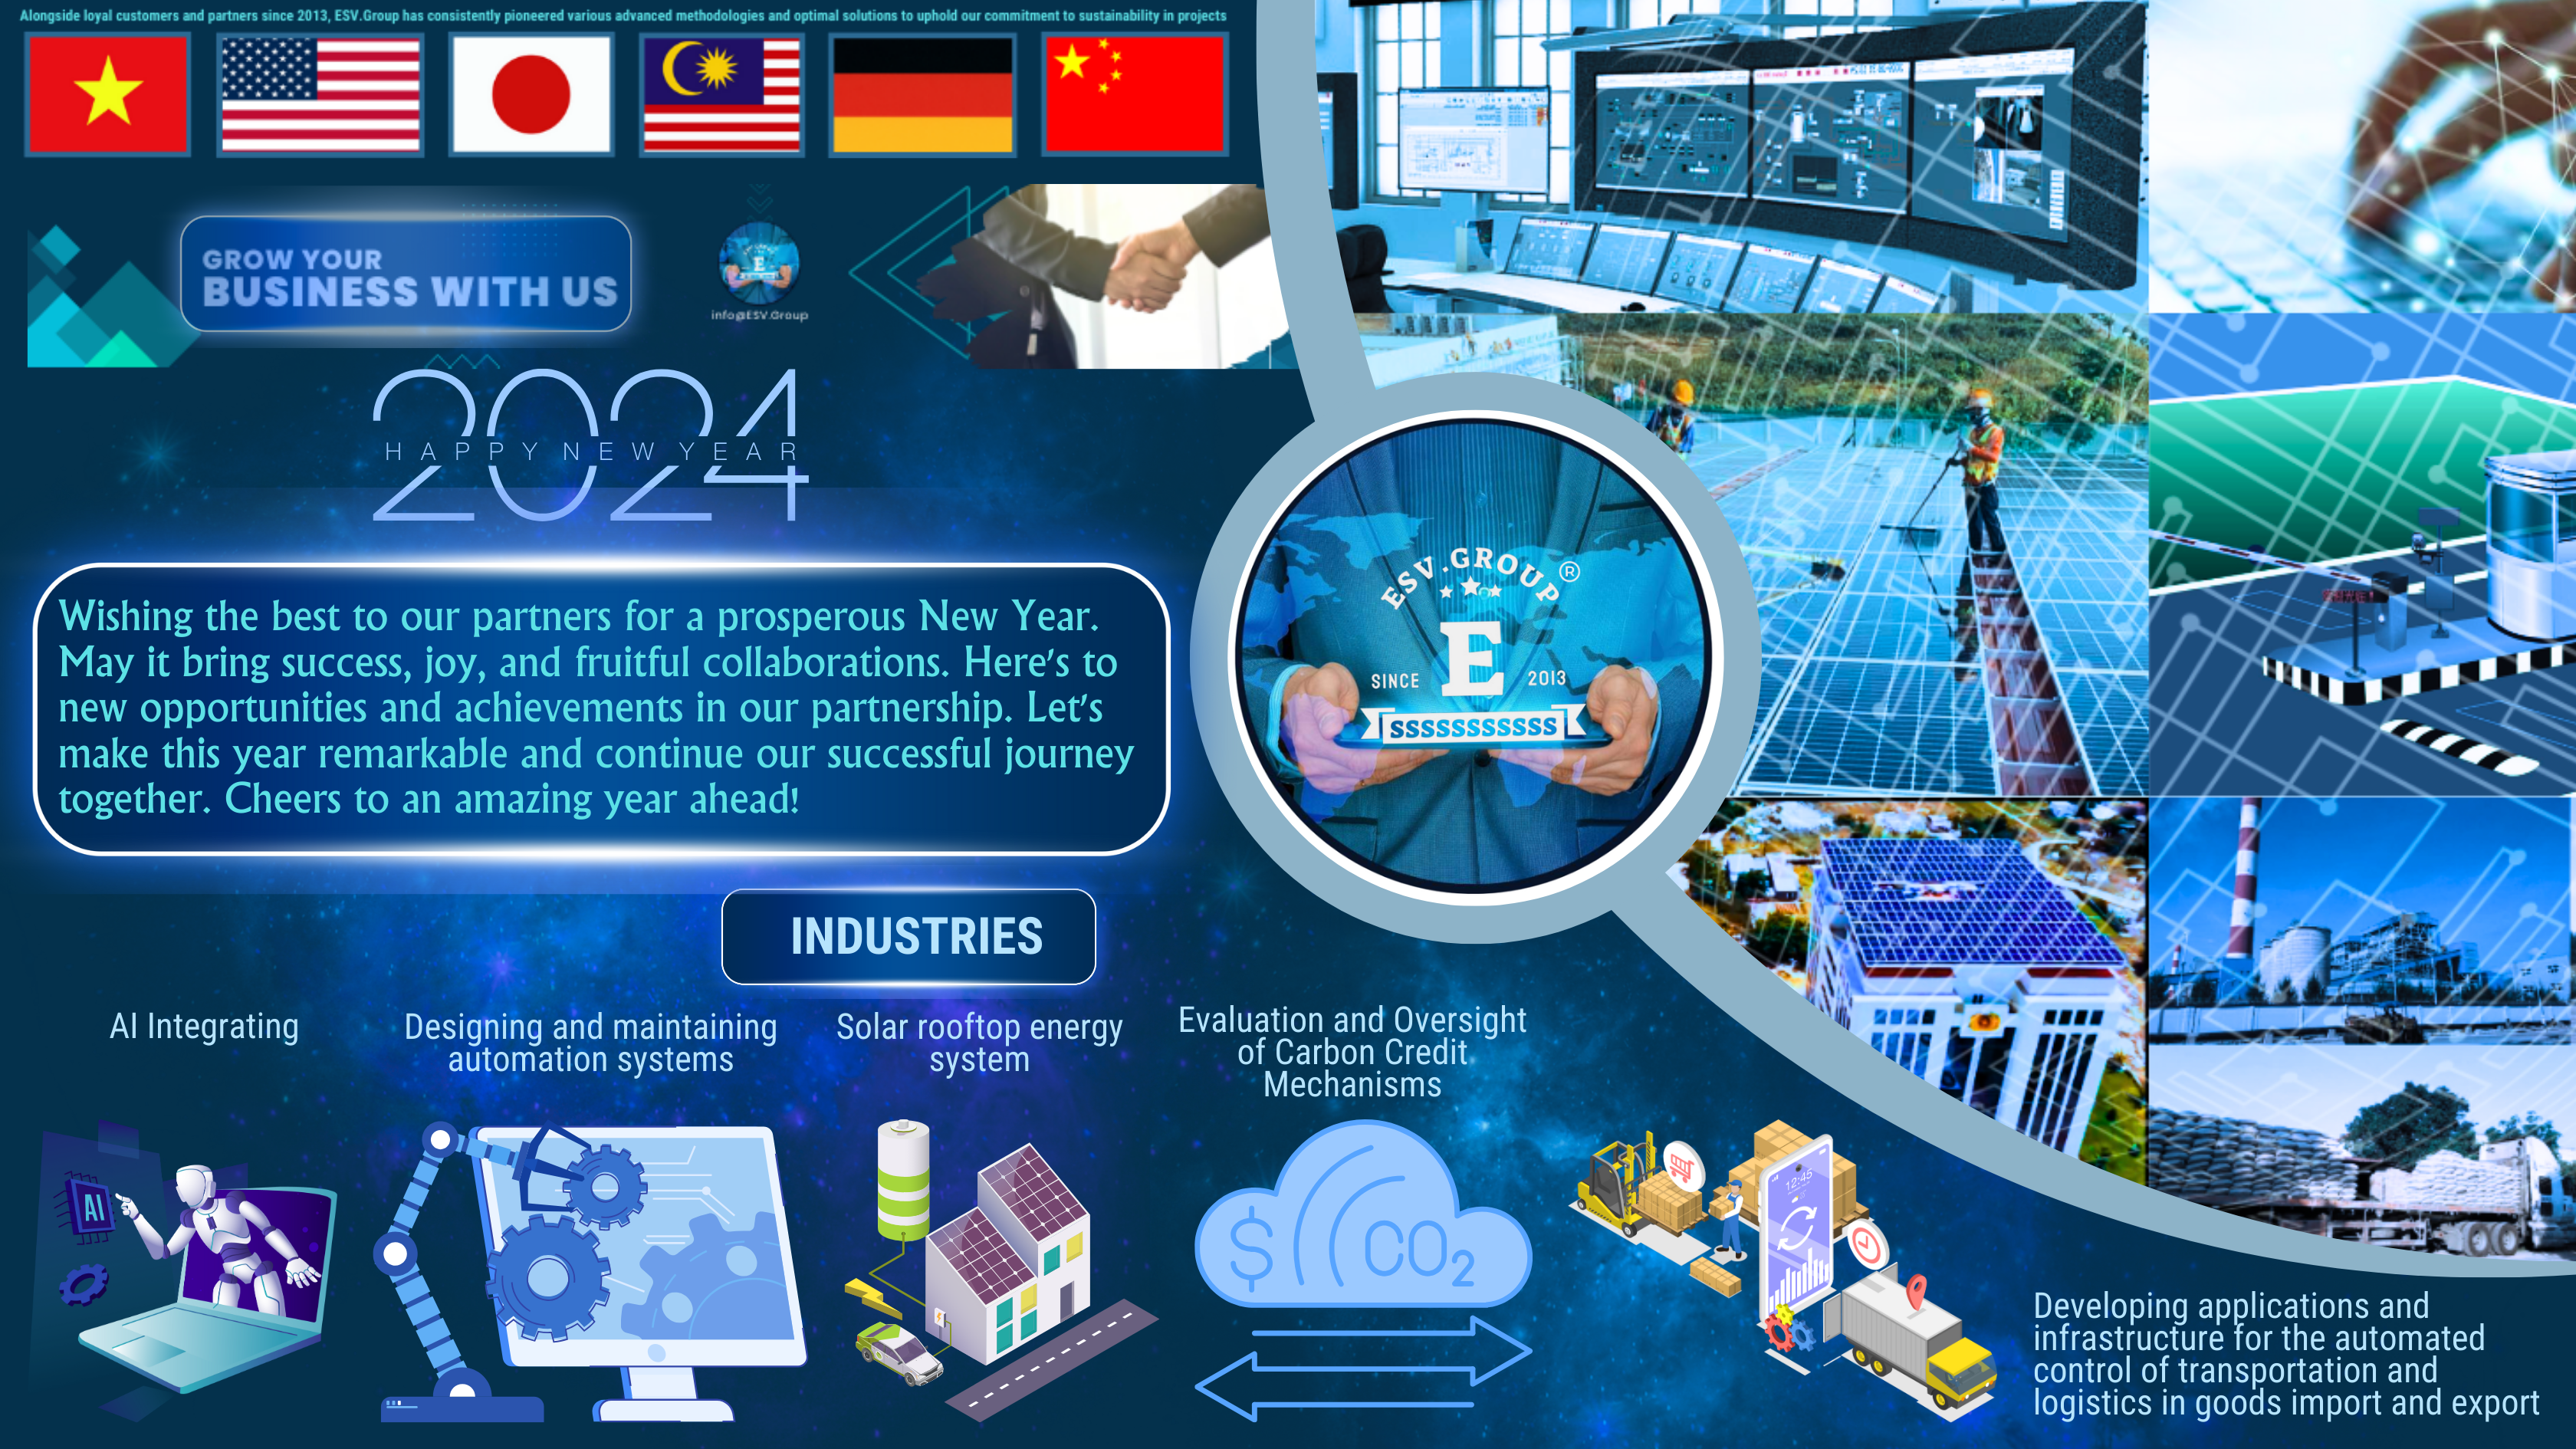 ESV GROUP offers collaborative prospects in AI integration, automation system design and maintenance, solar rooftop energy solutions, oversight of Carbon Credit Mechanisms, as well as developing applications and infrastructure for automated control in goods import and export logistics